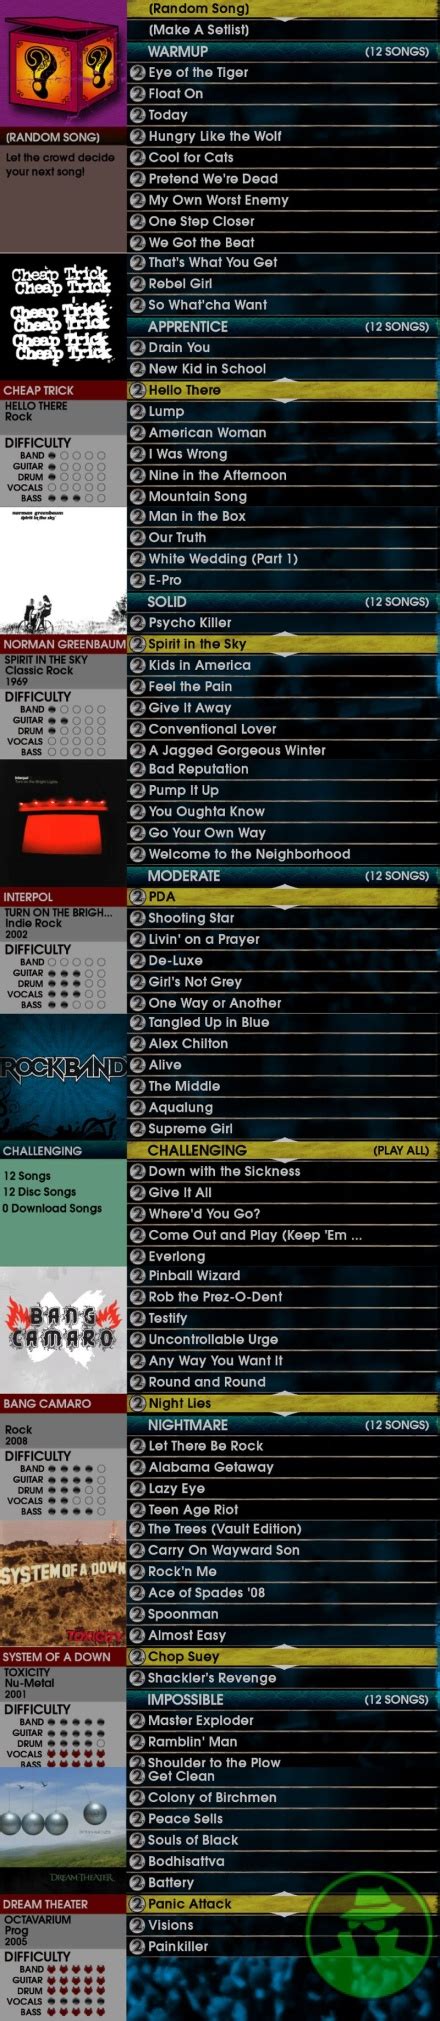 rock band  songs listed  difficulty xboxachievementscom